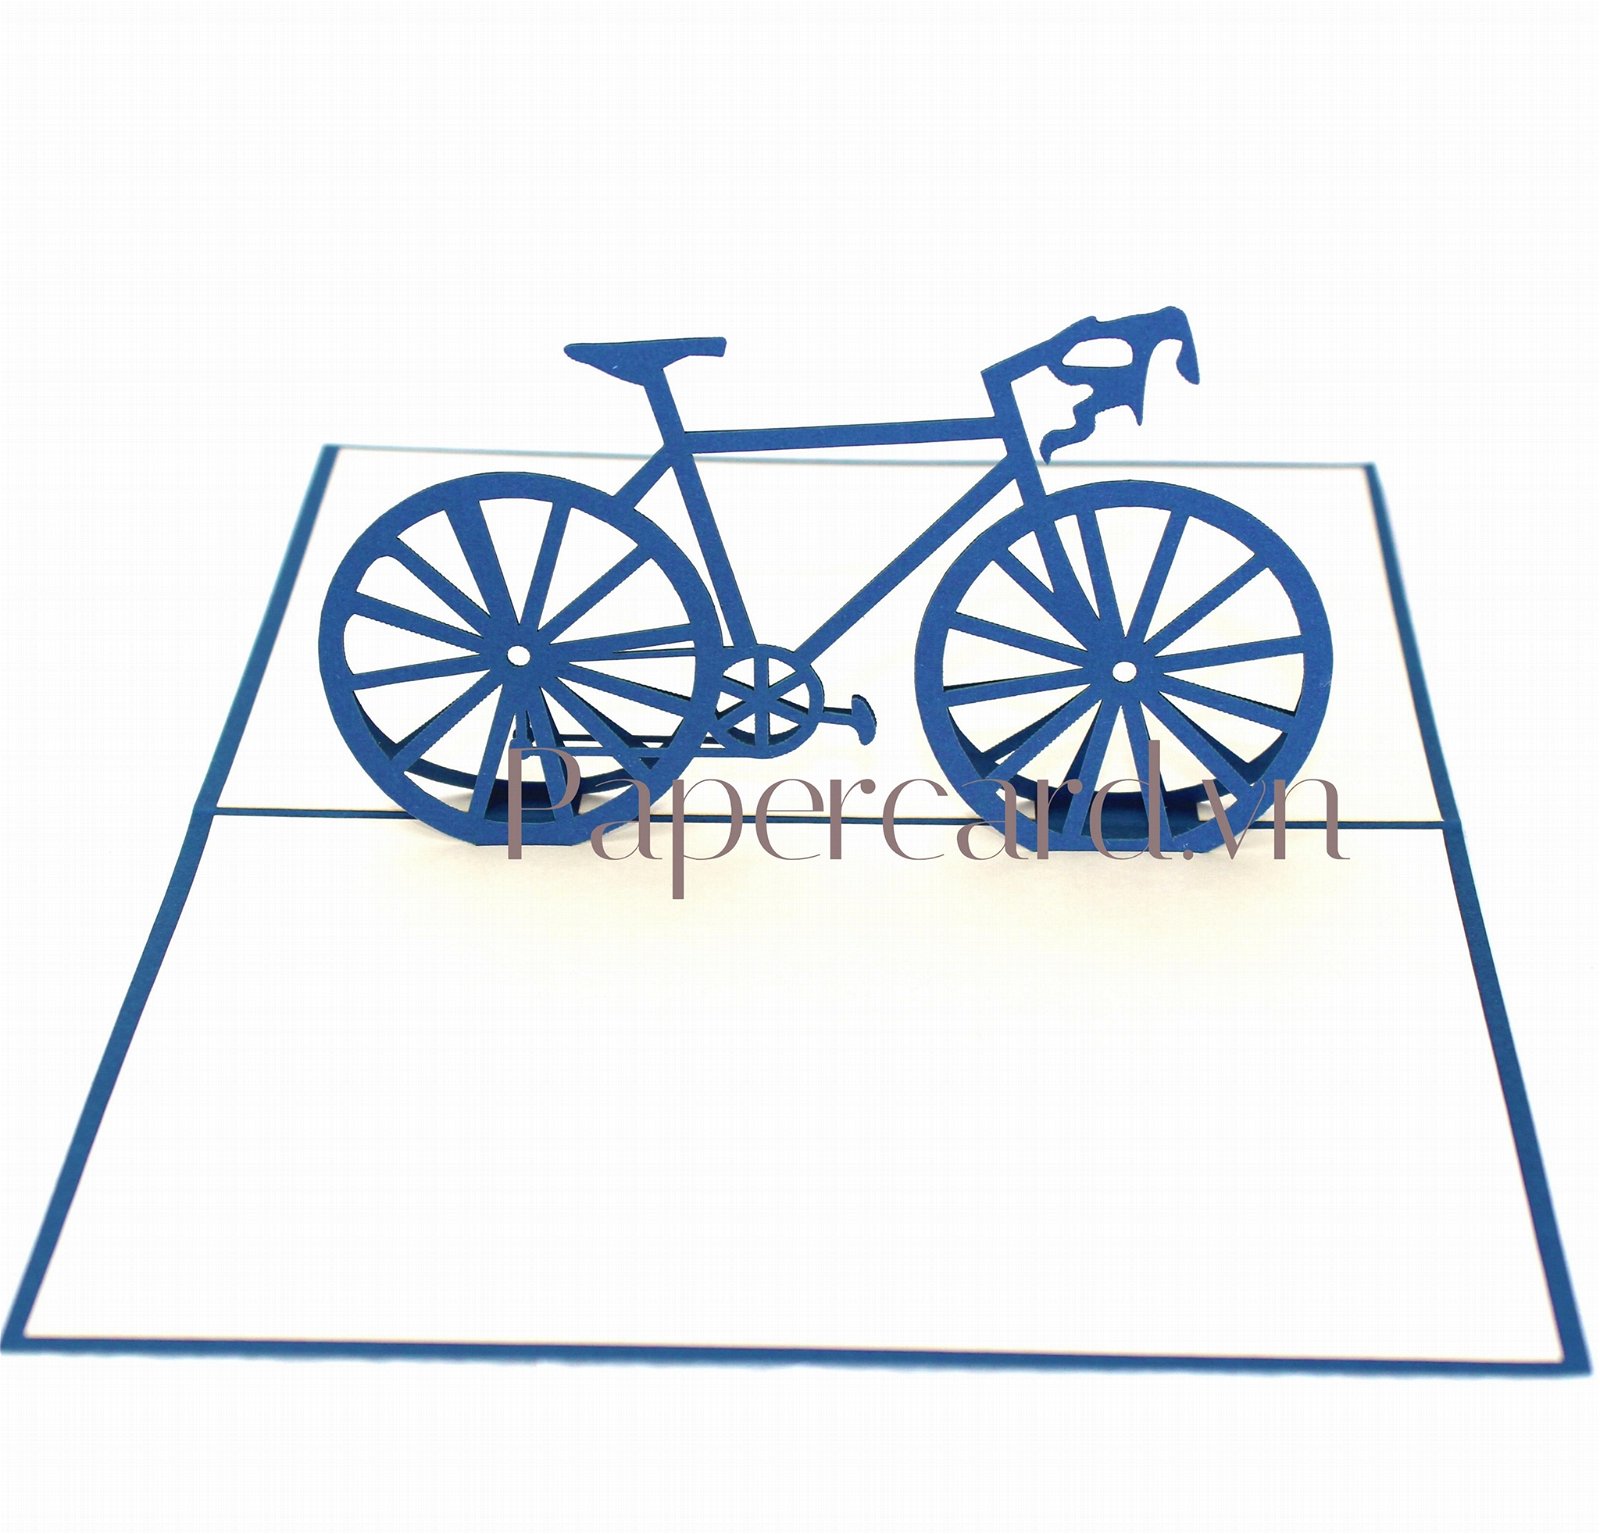 cyclist-3d-pop up card-greeting card-origamiccard